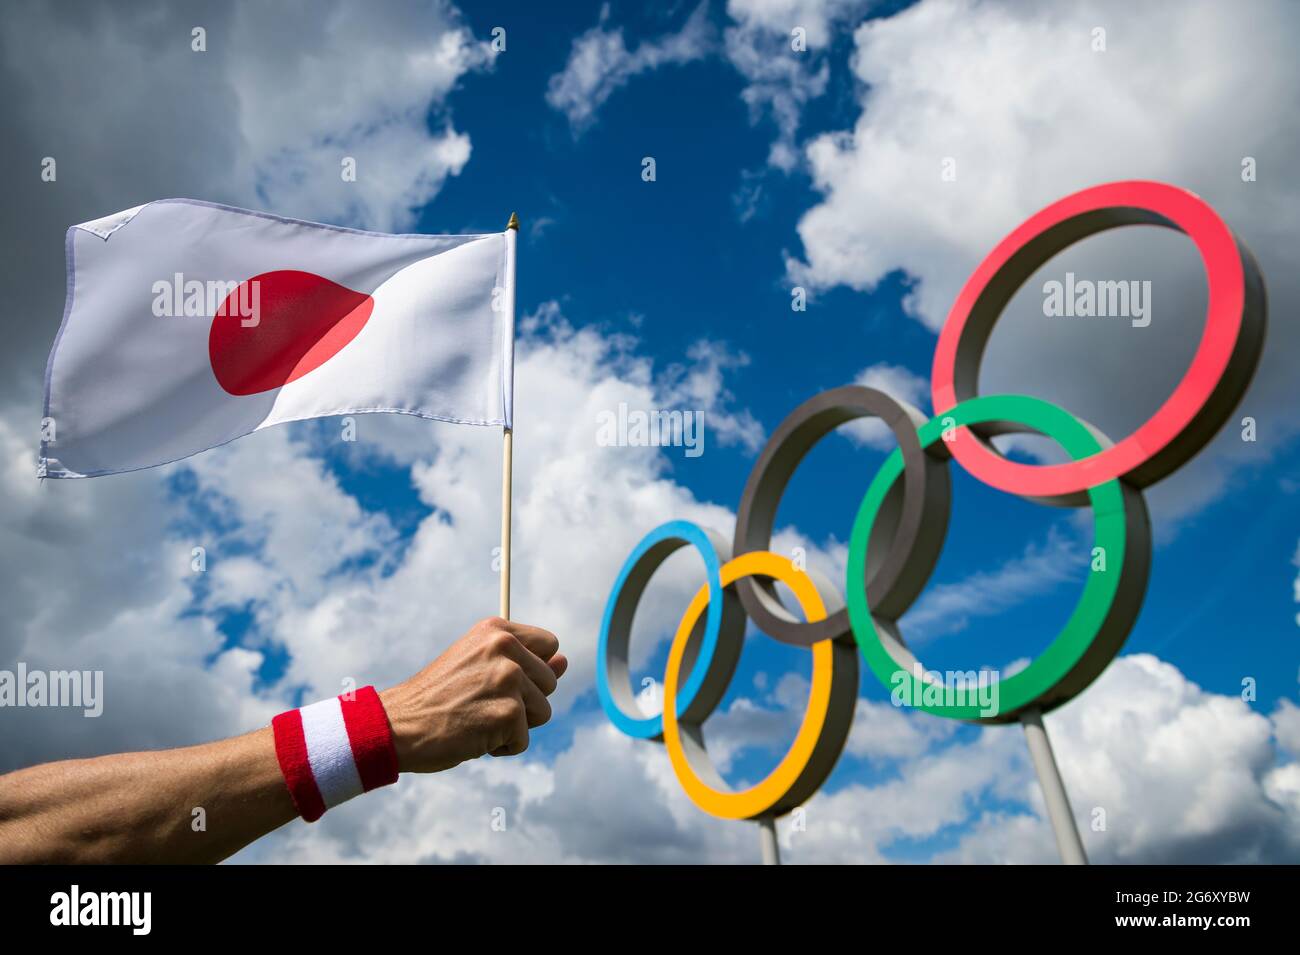 RIO DE JANEIRO - APRIL, 2016: A hand of Japanese athlete wearing a red and white wristband waves a Japanese flag in front of Olympic Rings and blue sk Stock Photo